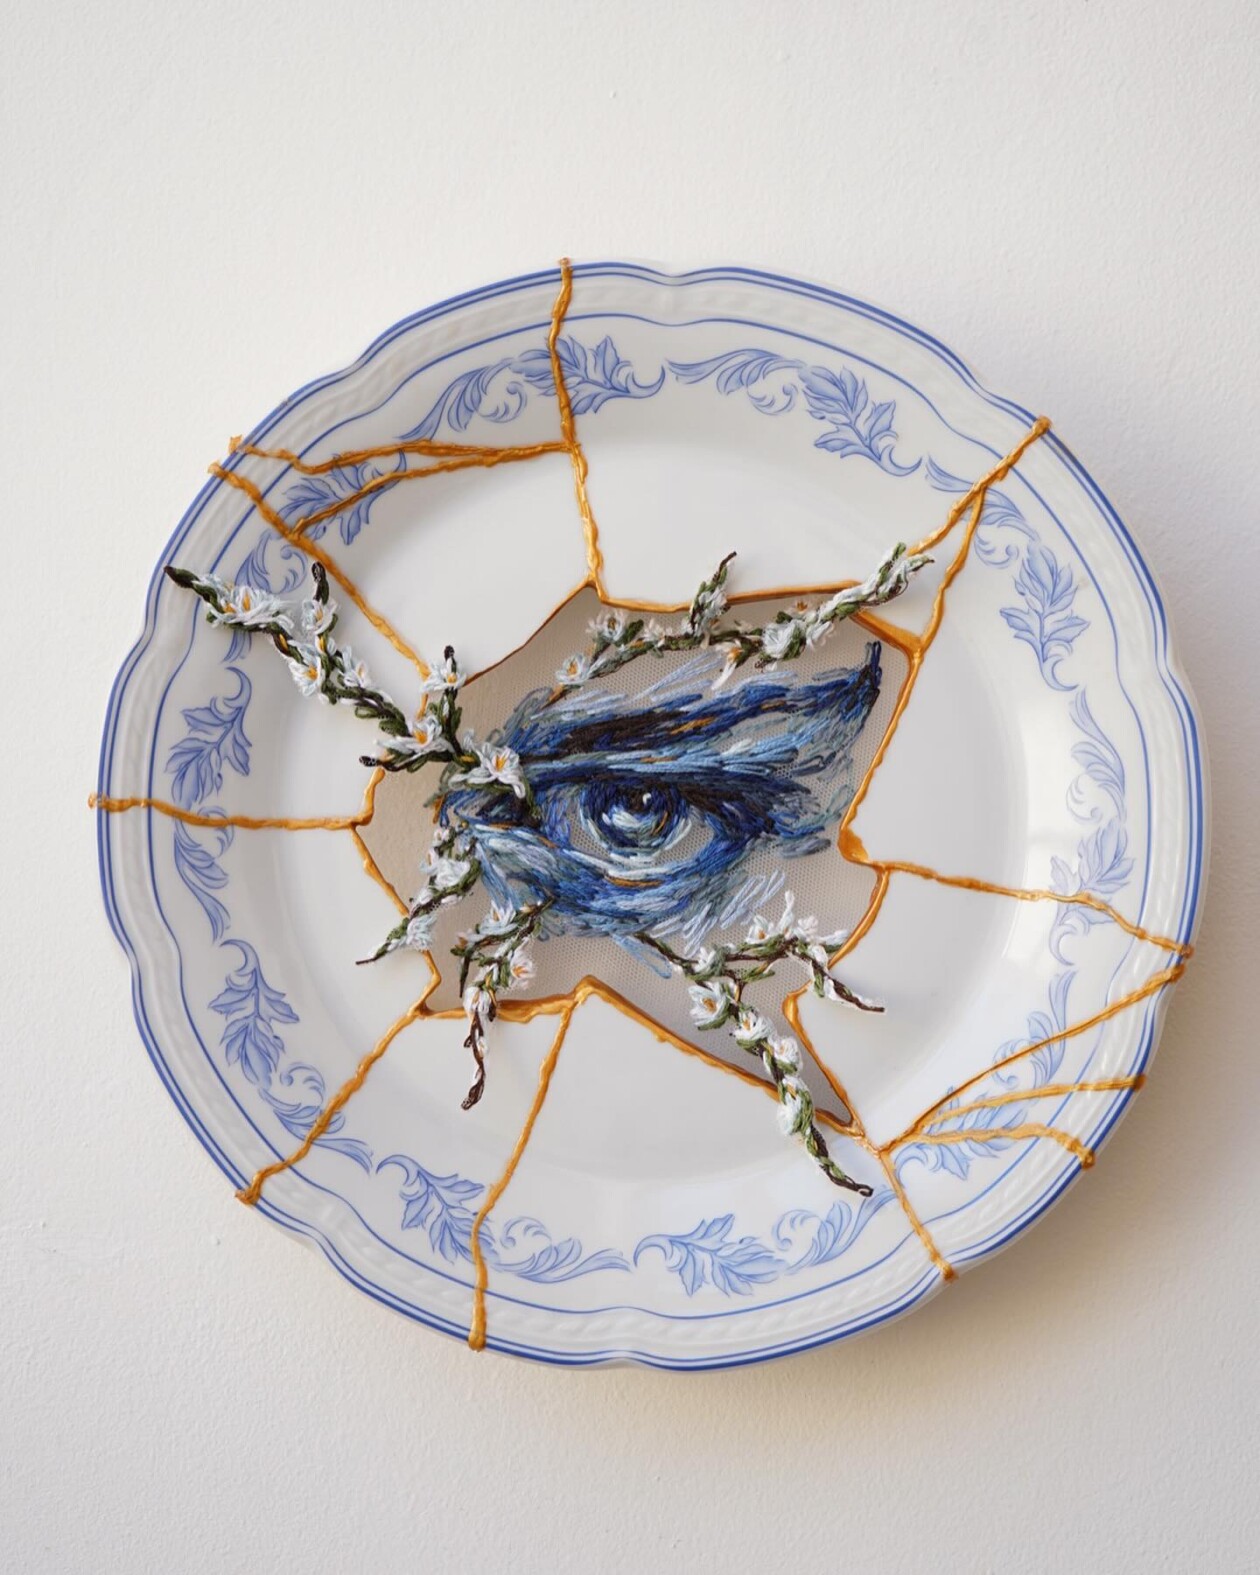 Embroidered Kintsugi, Delicate And Meaningful Mixed Media Artworks By Kathrin Marchenko (8)